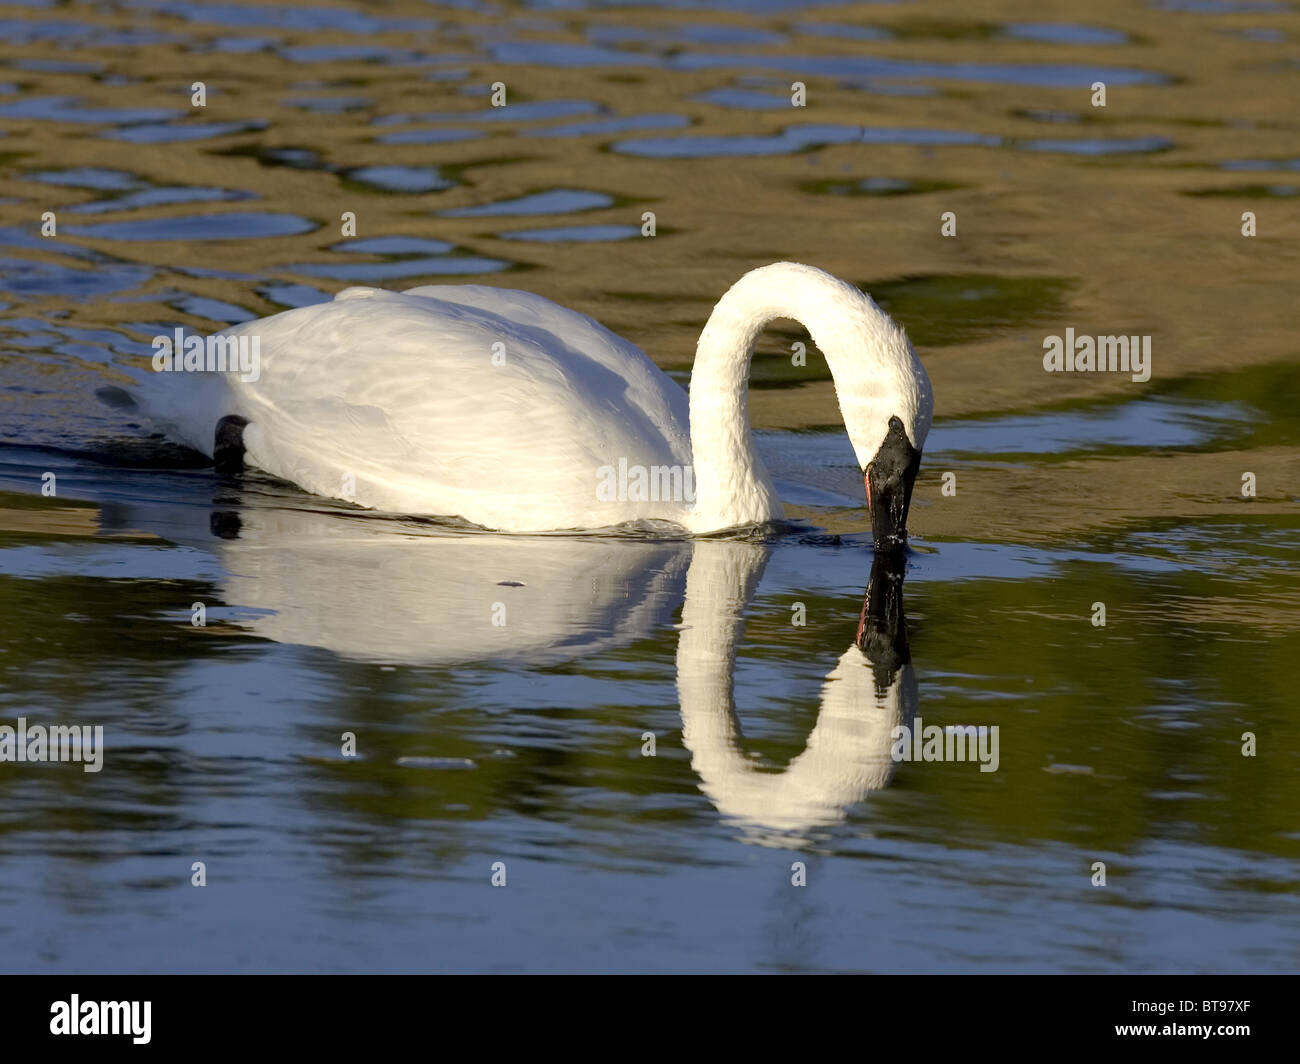 Trumpeter swan with reflection in water Stock Photo